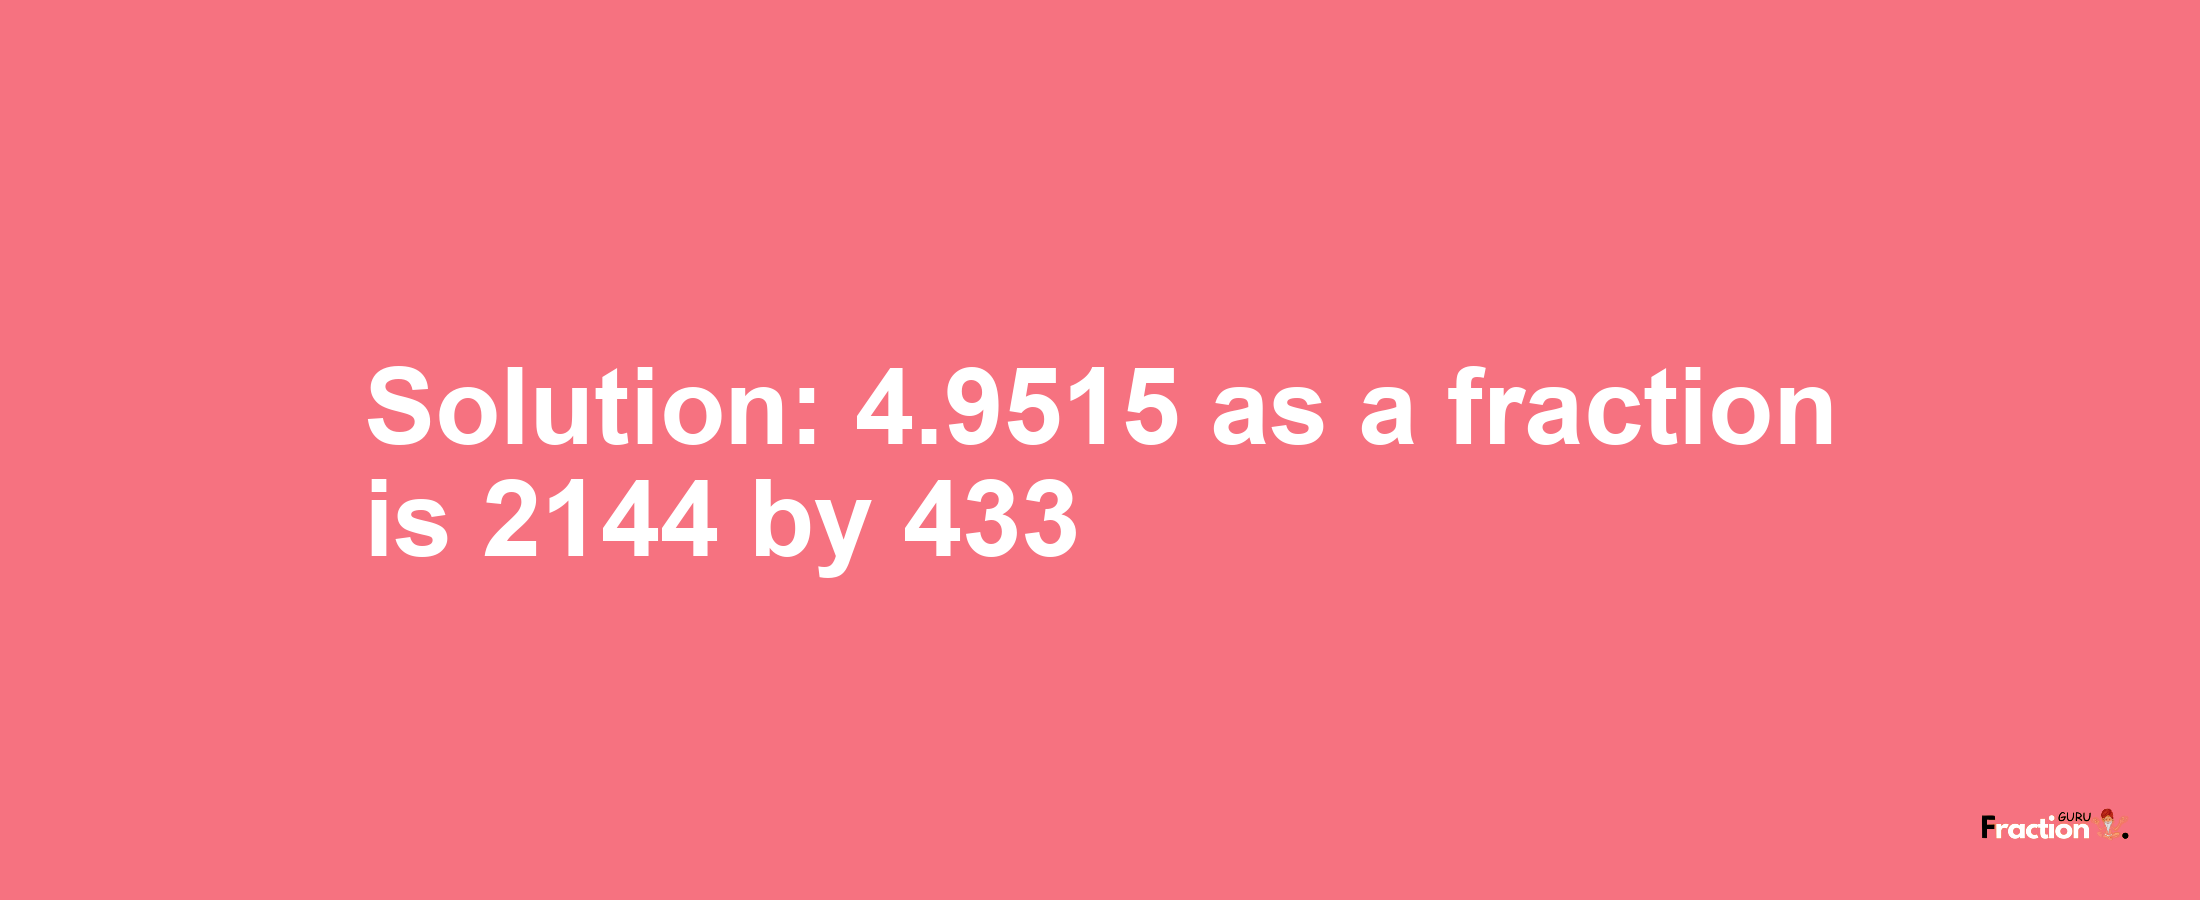 Solution:4.9515 as a fraction is 2144/433